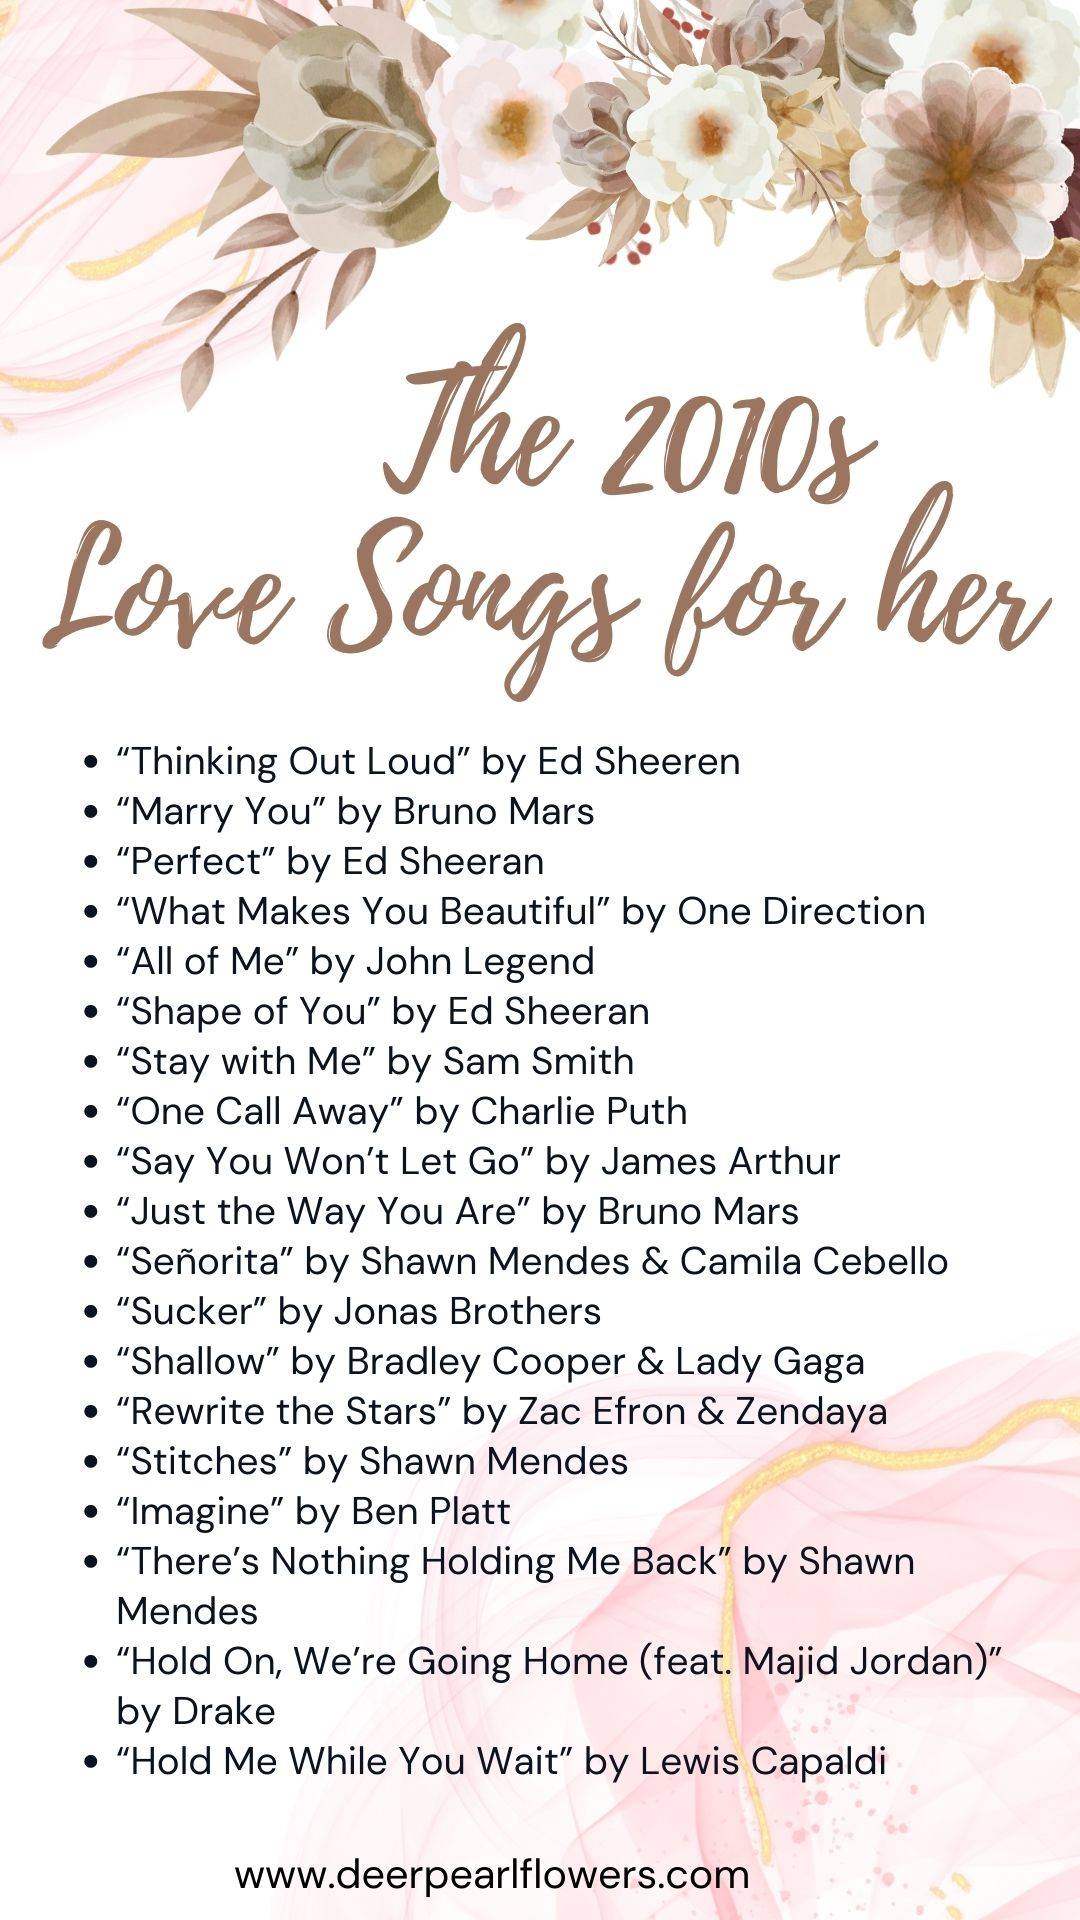 2010s Love Songs for Her